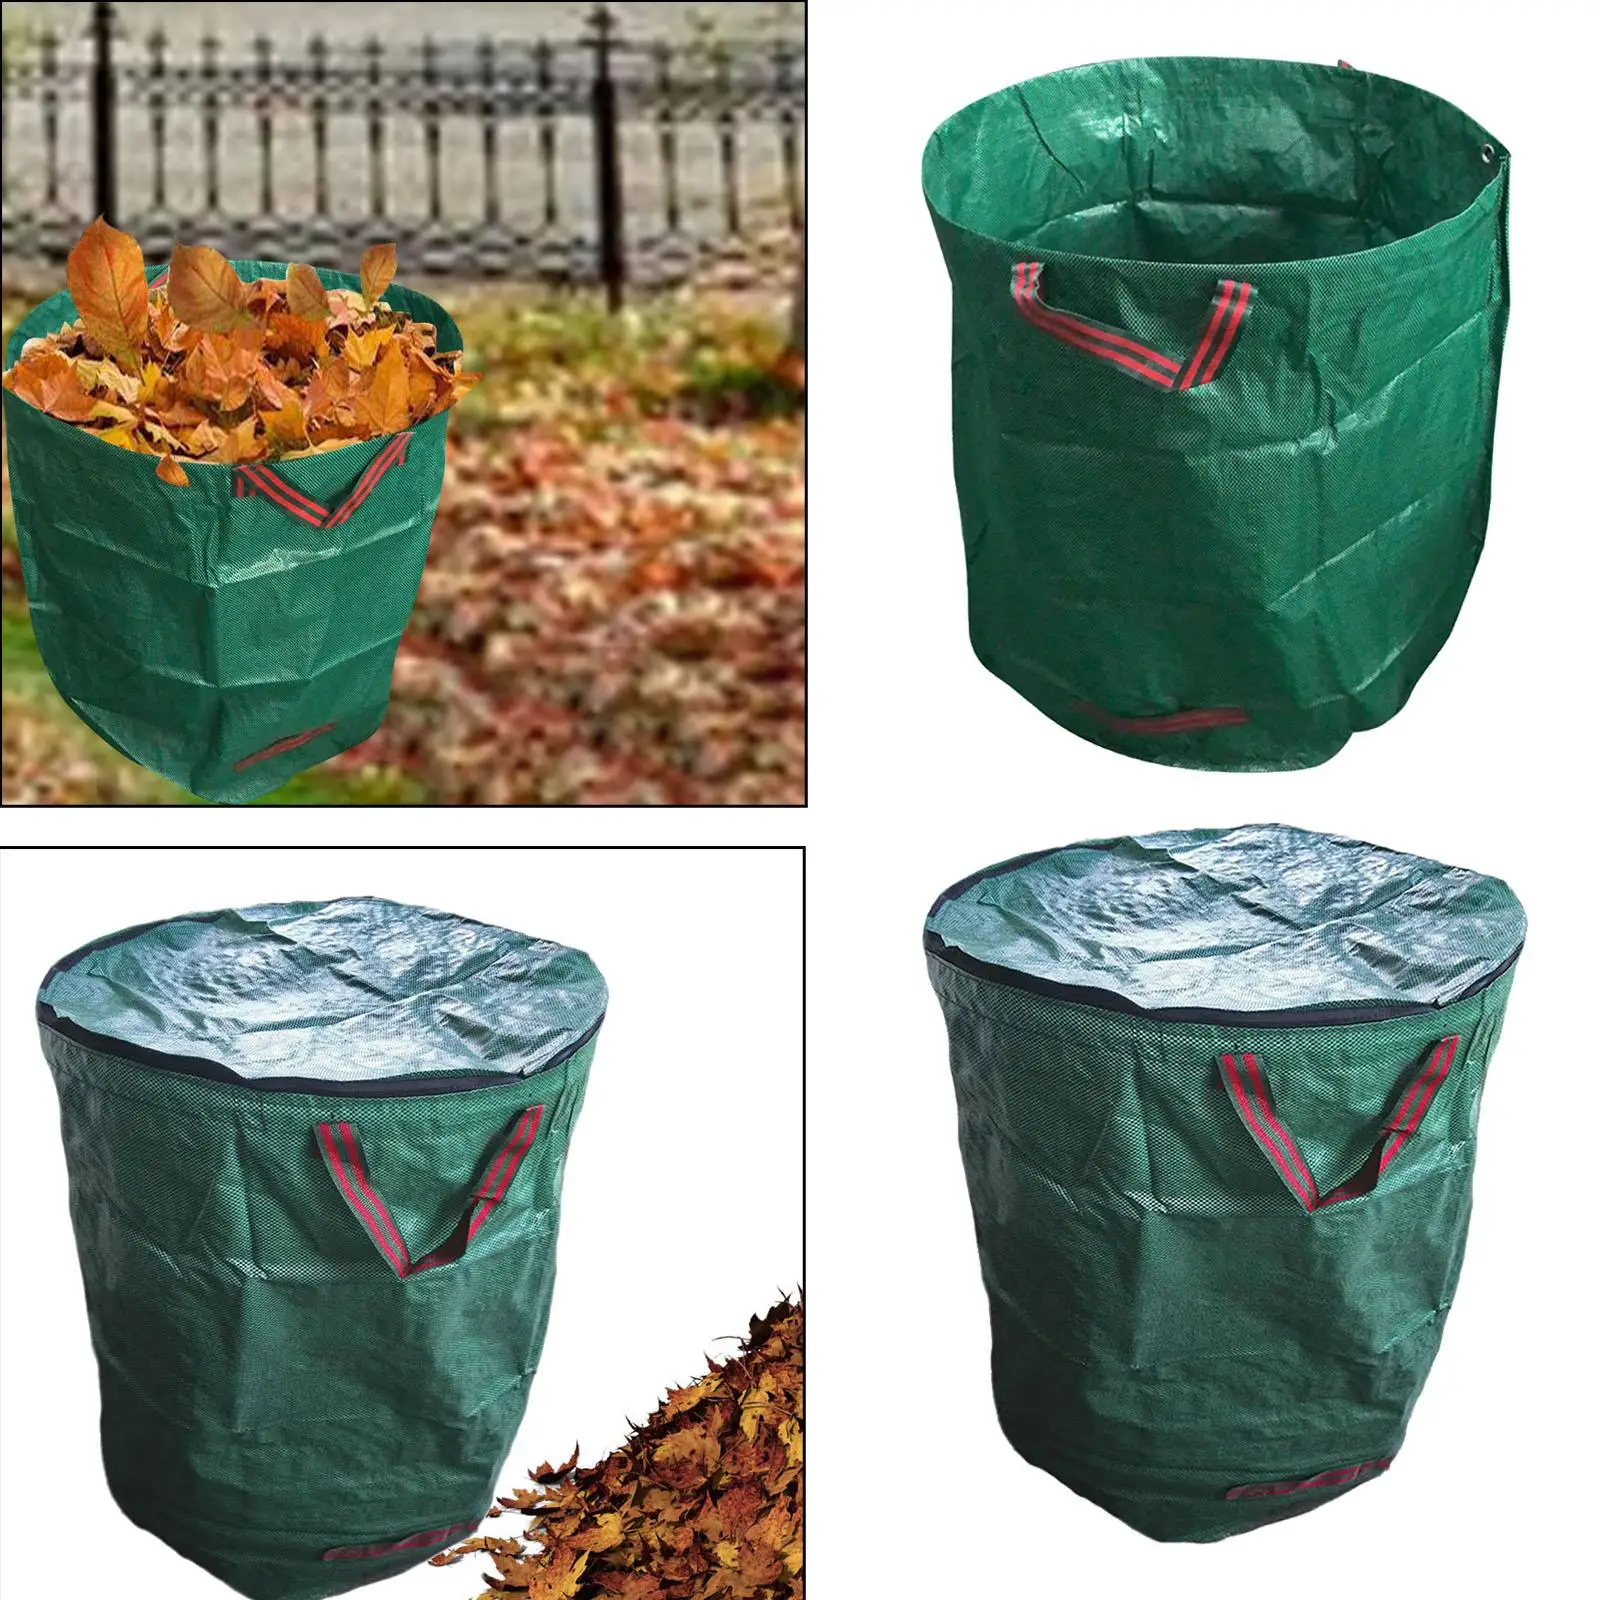 Garden Waste Bags Laundry Container Lawn Garden Bags Gardening Bags for Garden Lawn Pool Debris Grass Clipping Loading Leaf